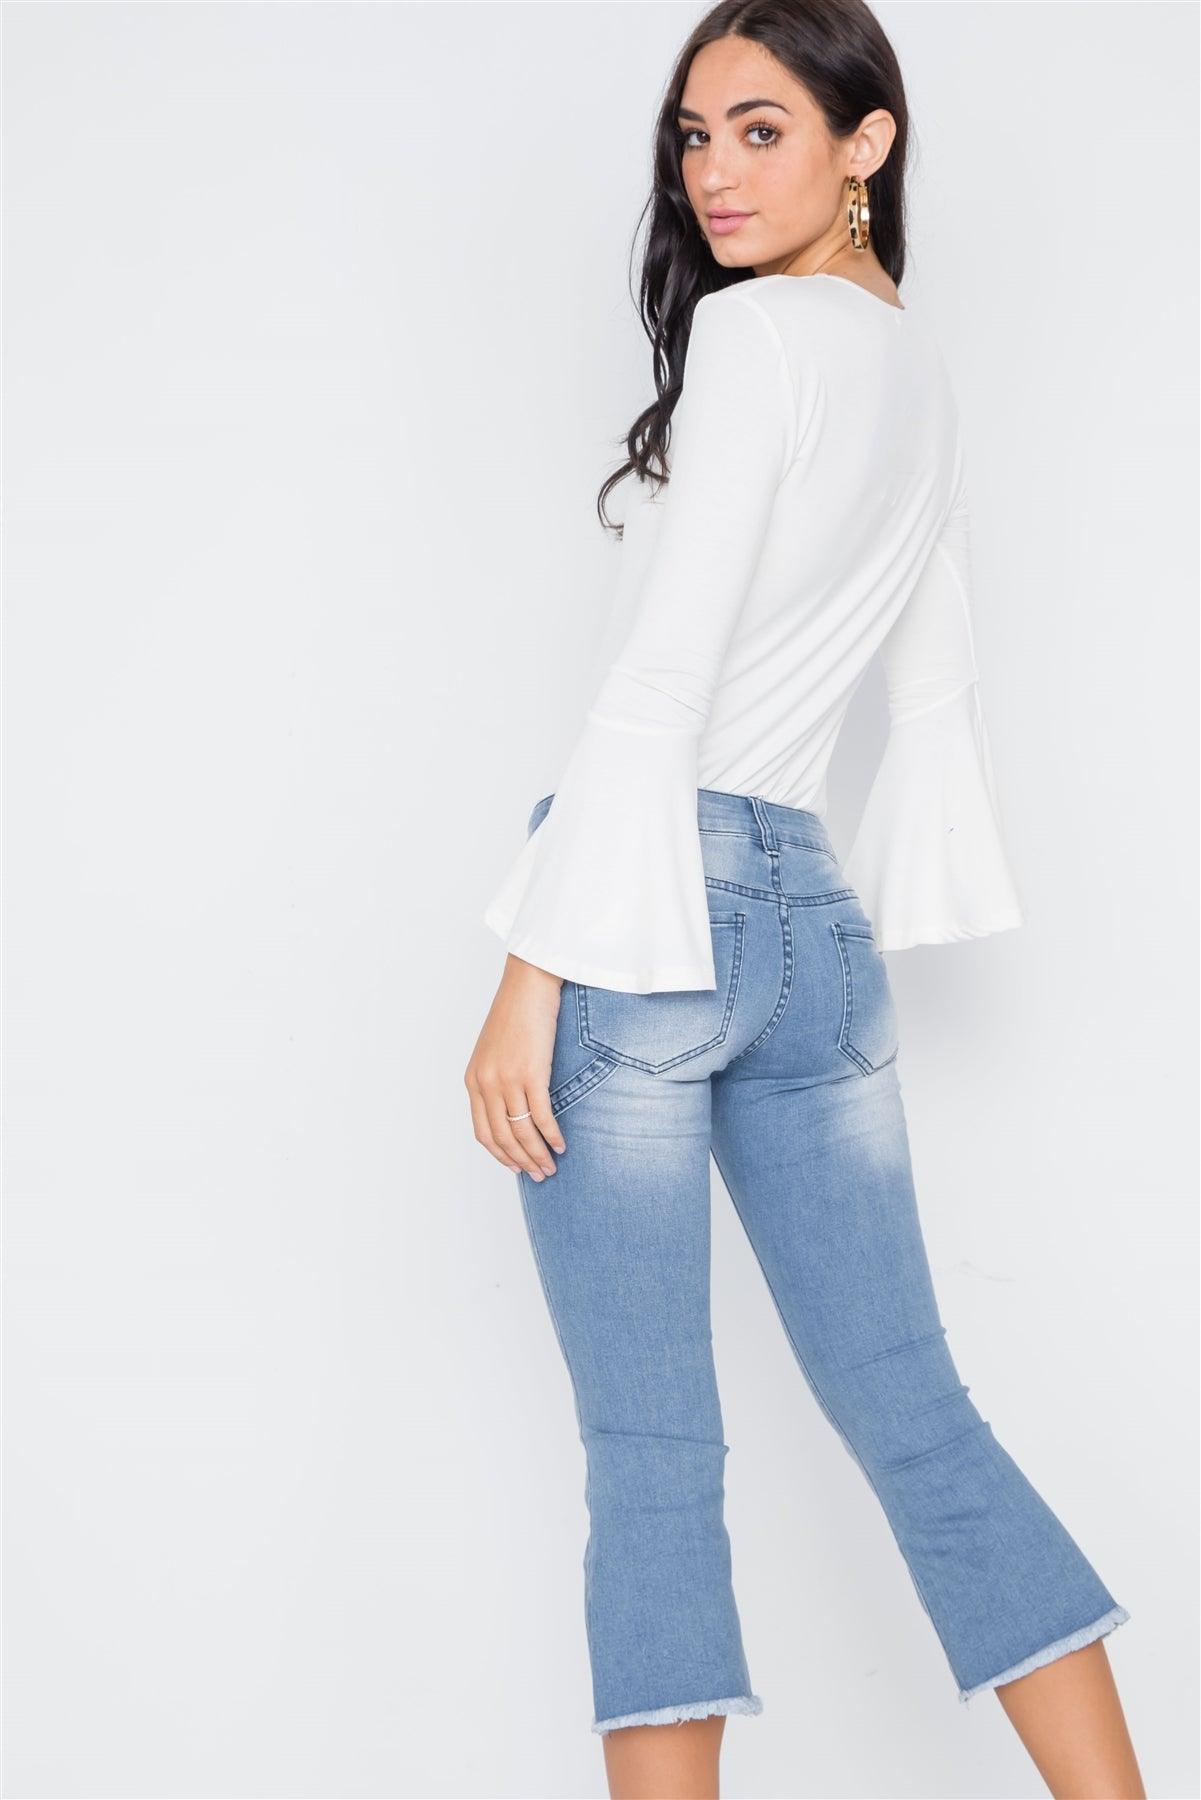 Denim Light Blue Mid-Rise Flare Cropped Jeans /2-2-2-2-2-2-1